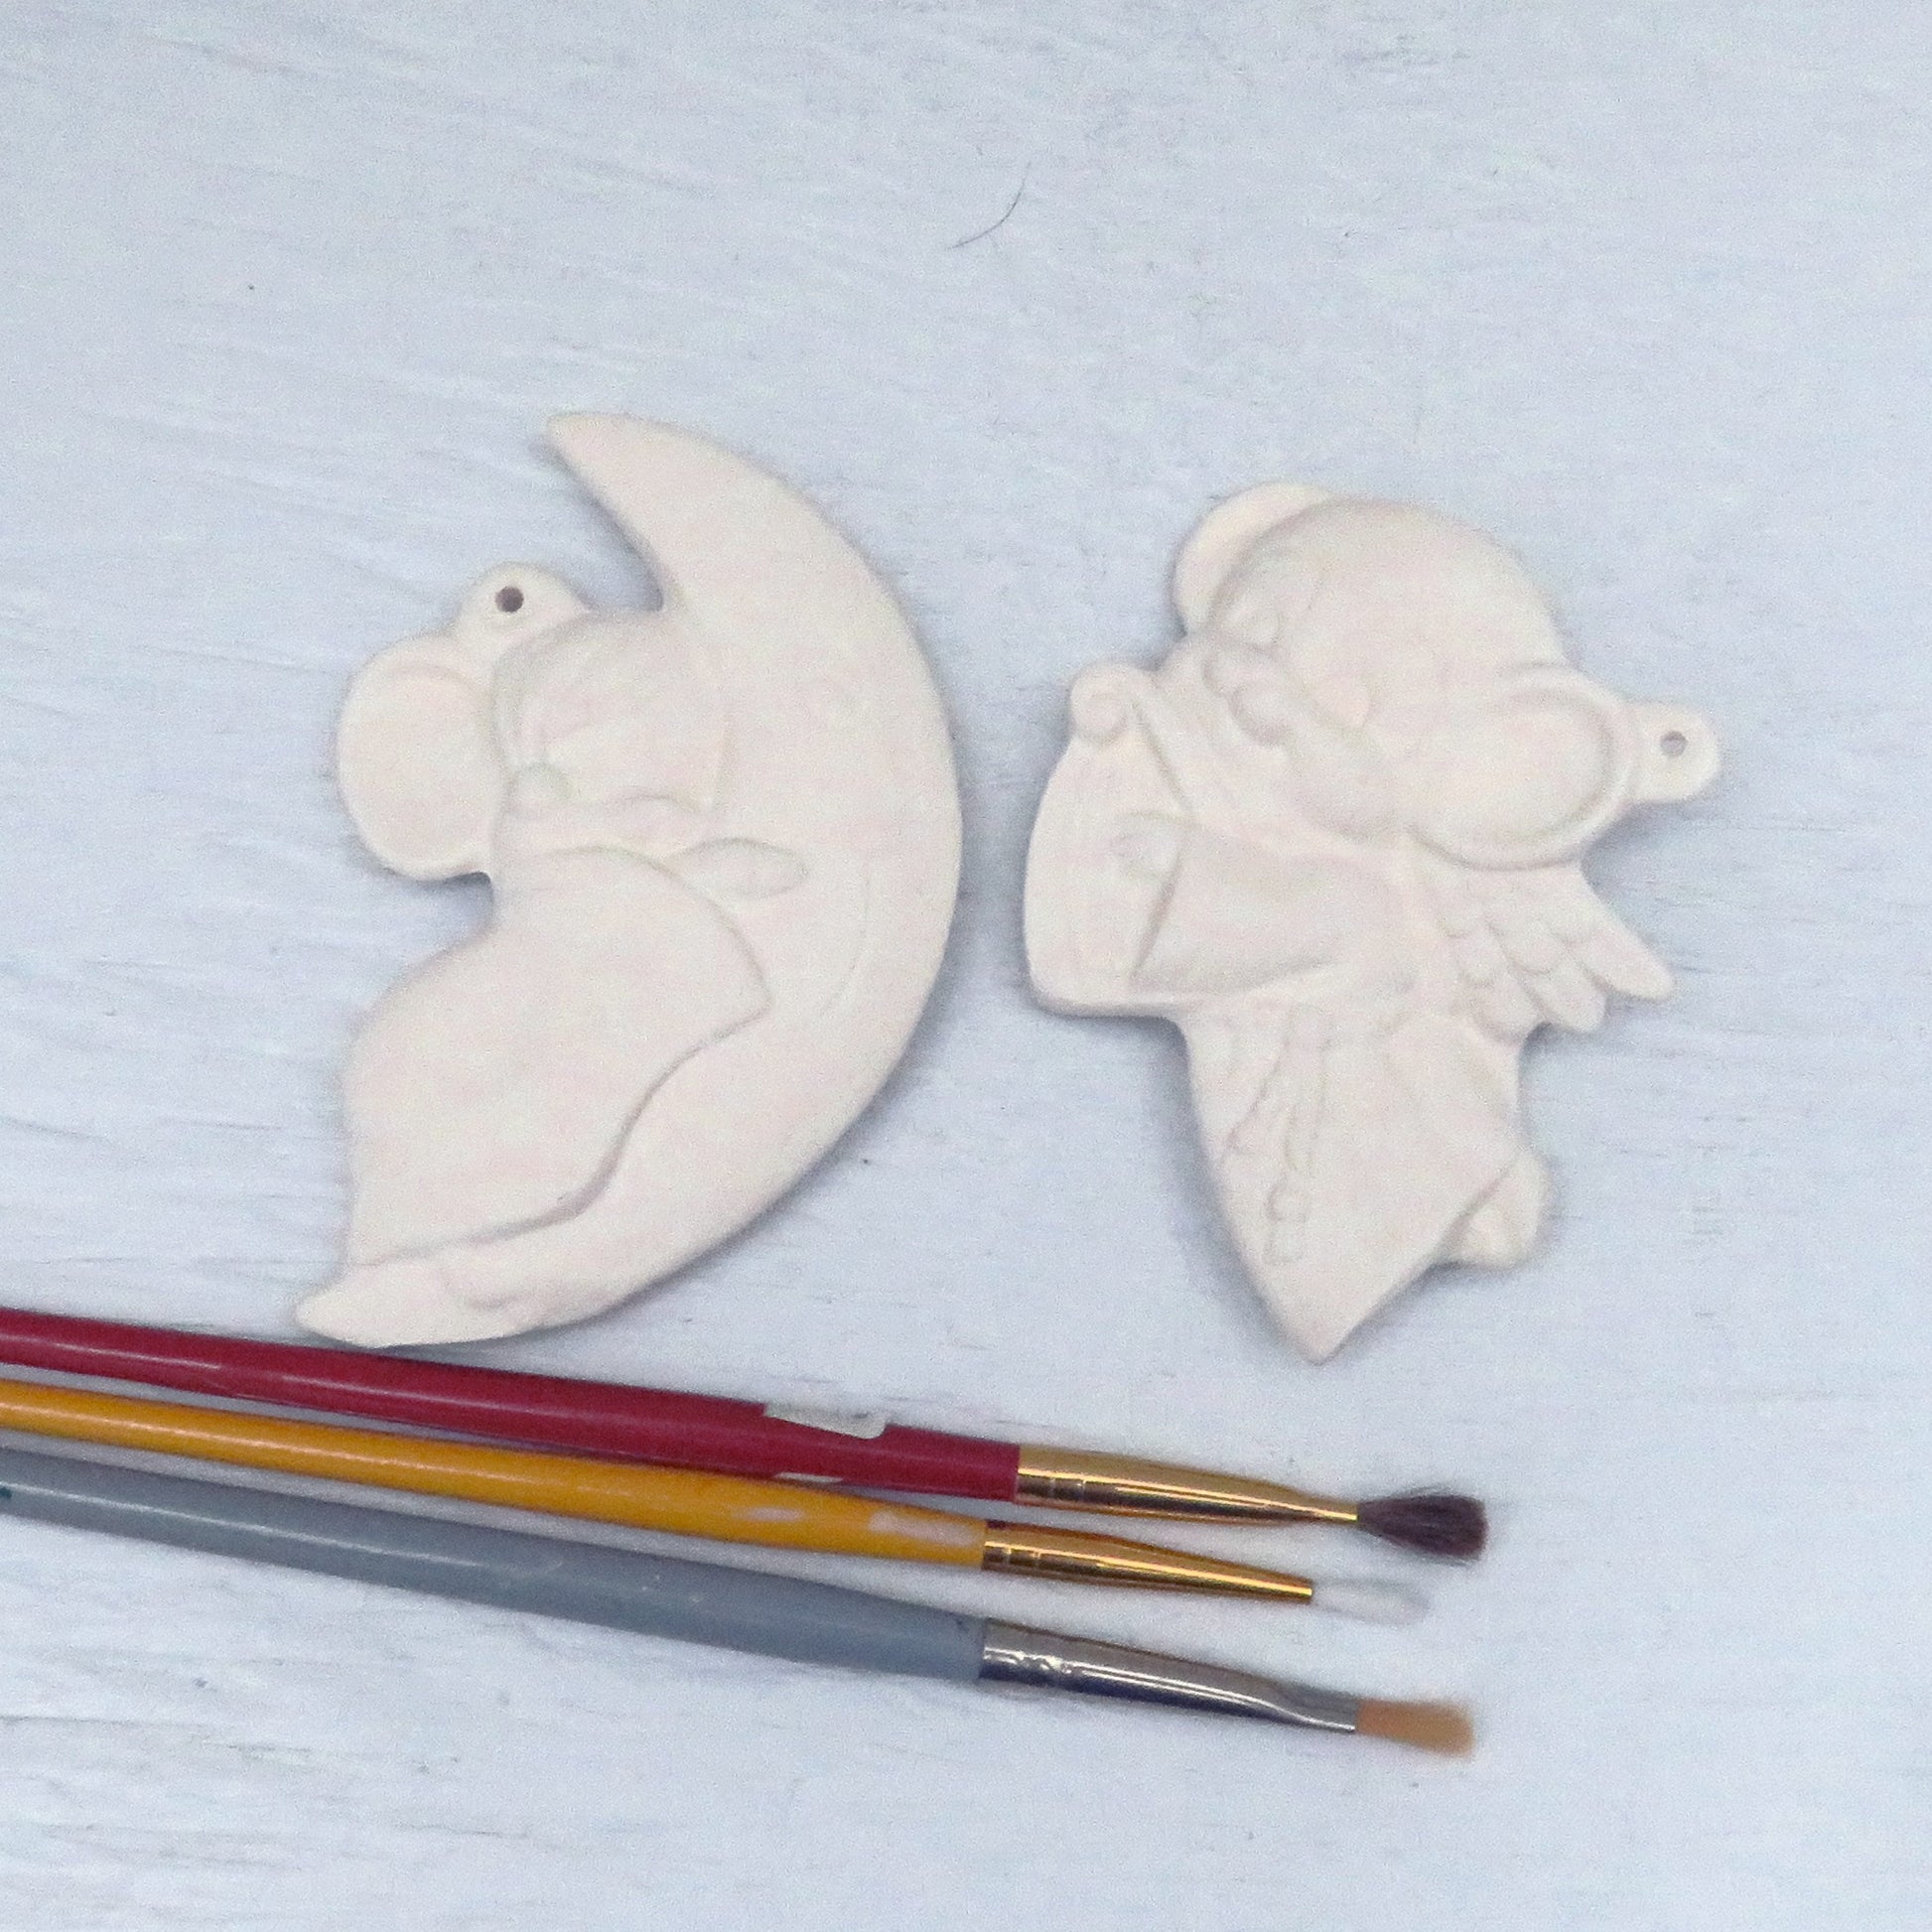 Handmade paintable ceramic Christmas tree ornaments showing a mouse on a crescent moon and an angel mouse with a harp.  There are 3 paint brushes , not included in the set on a pale blue background.